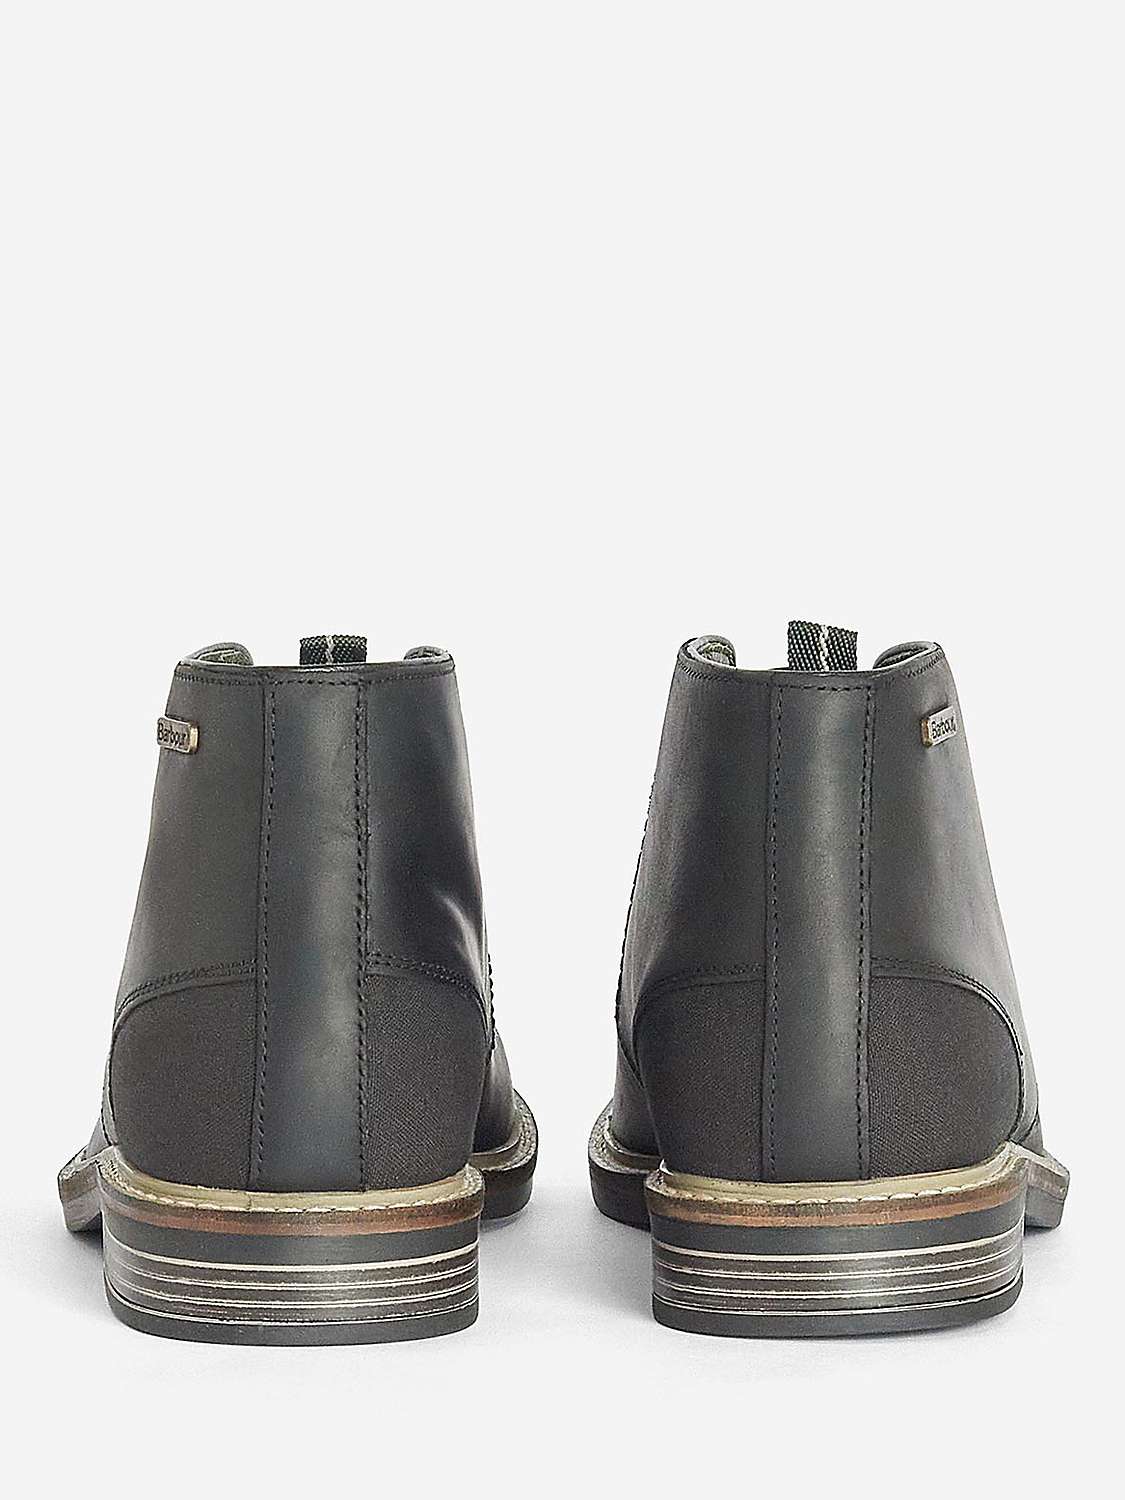 Buy Barbour Redhead Lightweight Chukka Boots Online at johnlewis.com